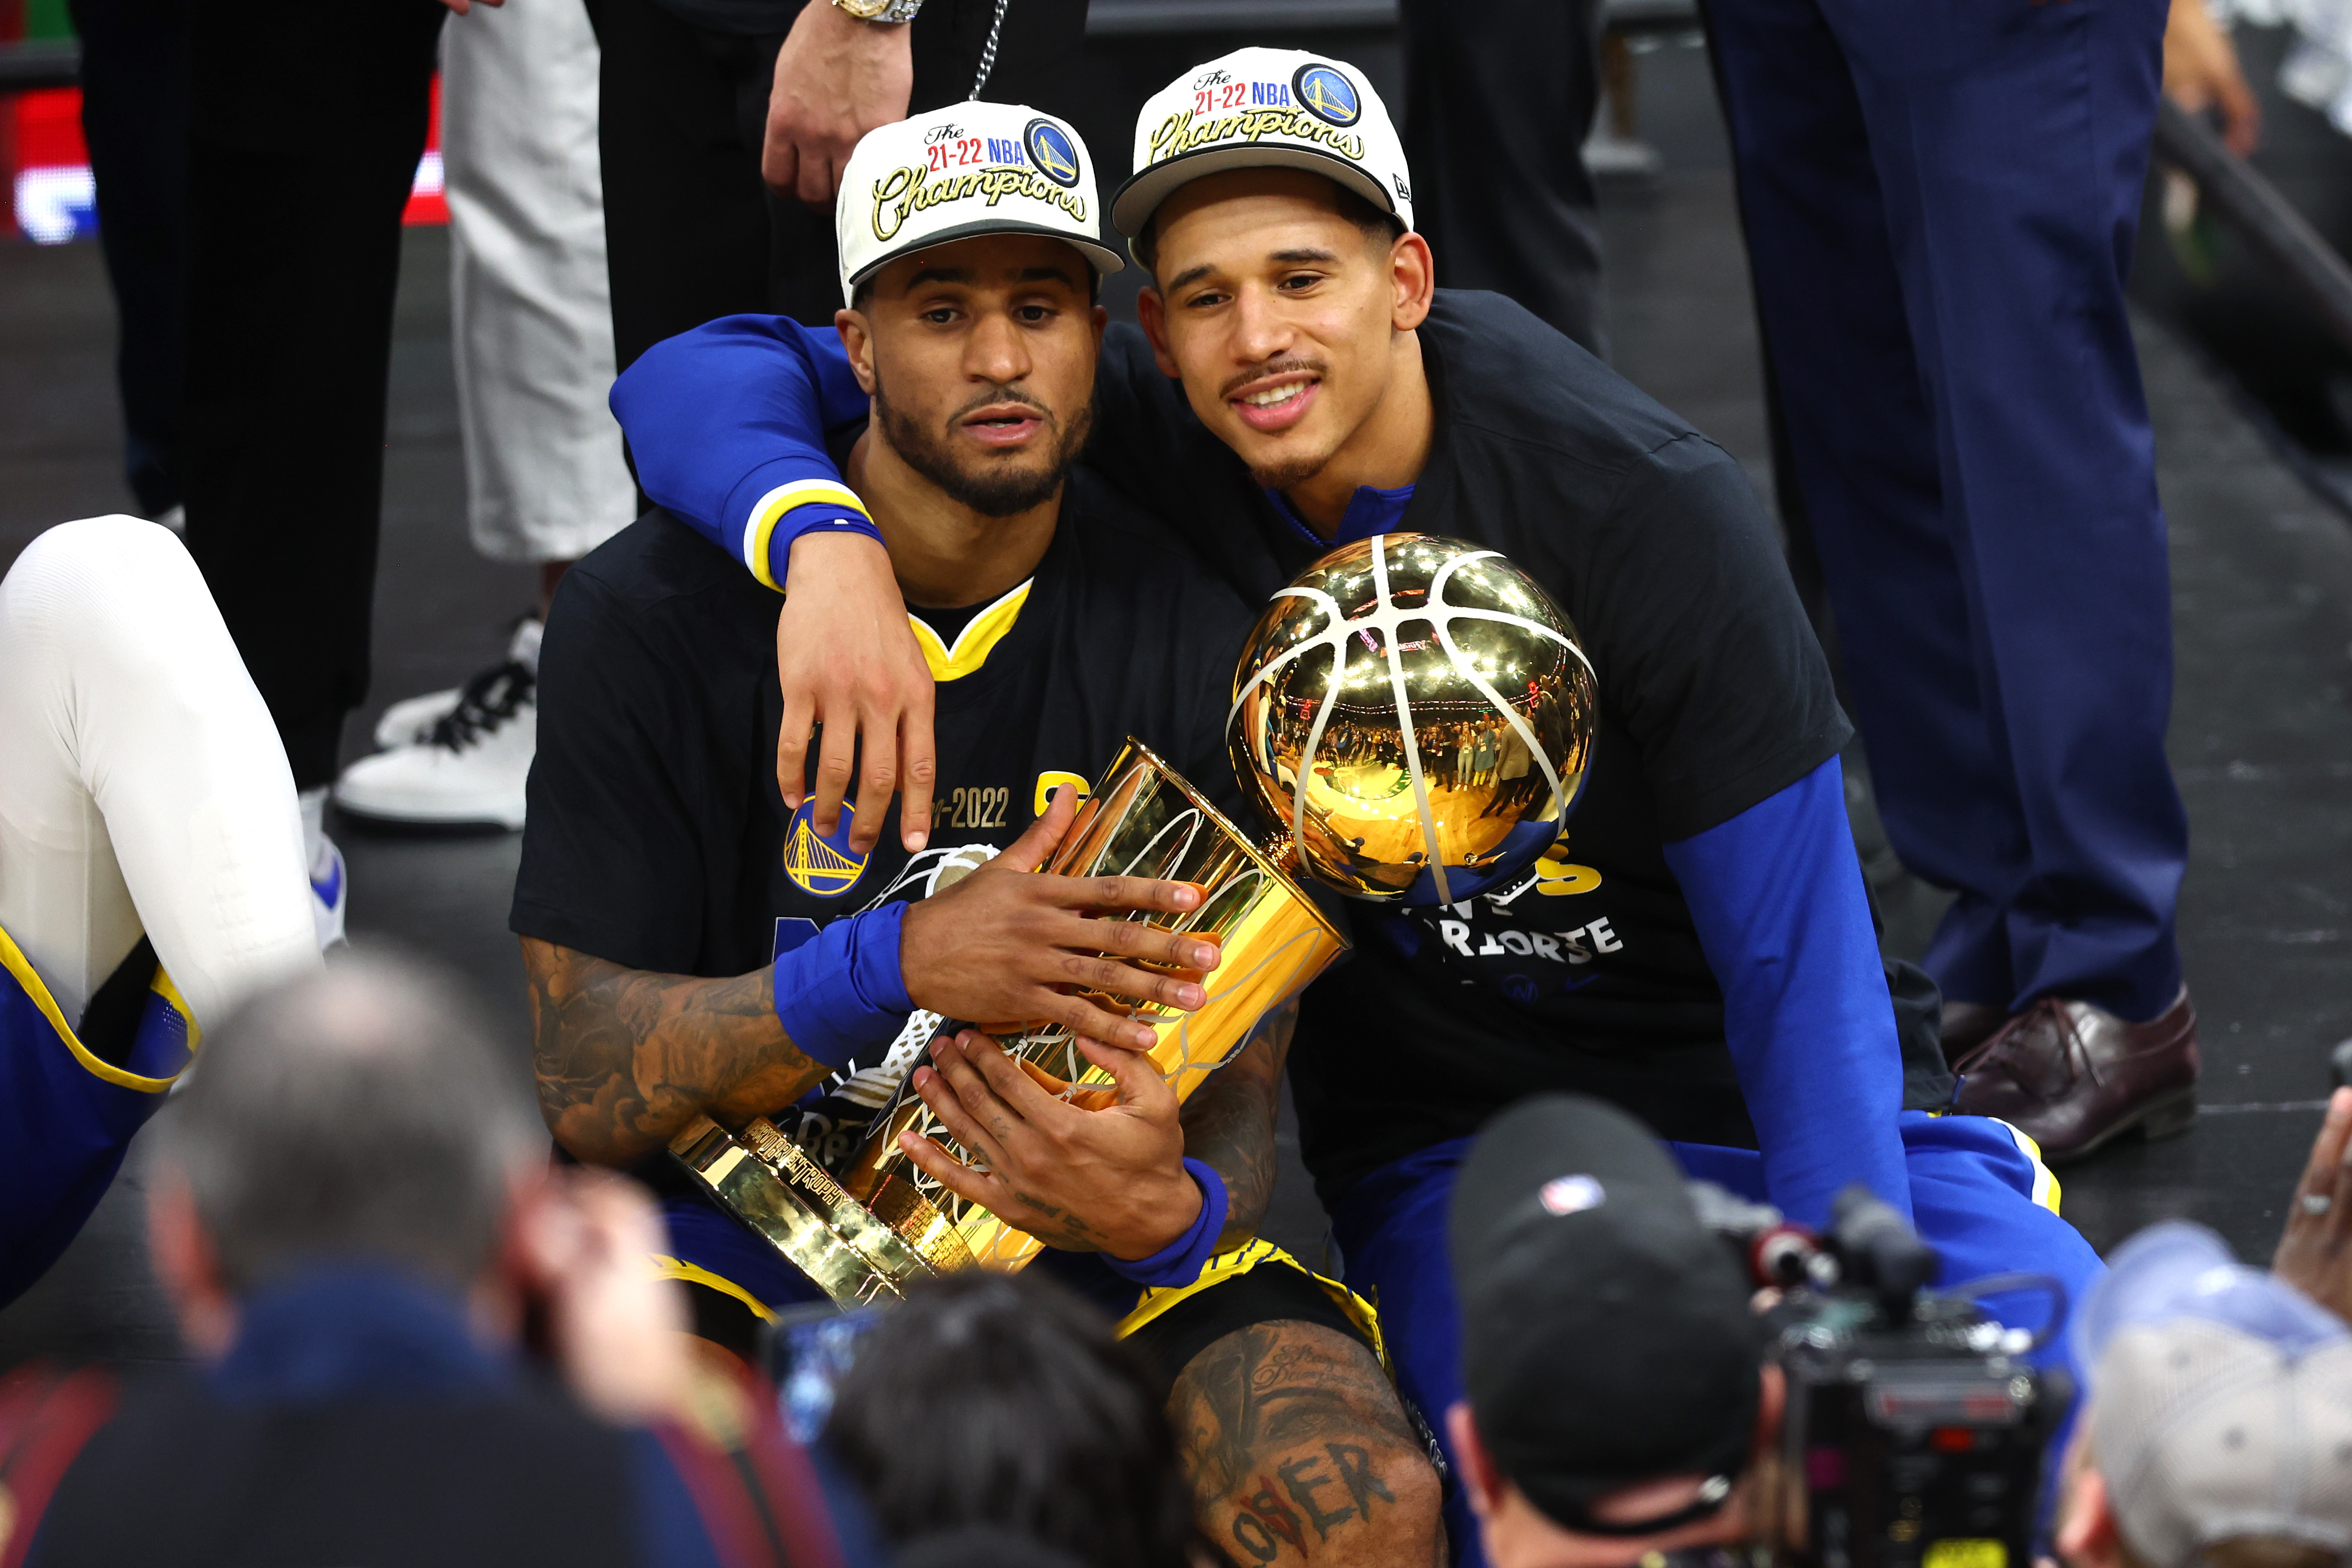 PIER 39 - The Golden State Warriors are NBA Champions!